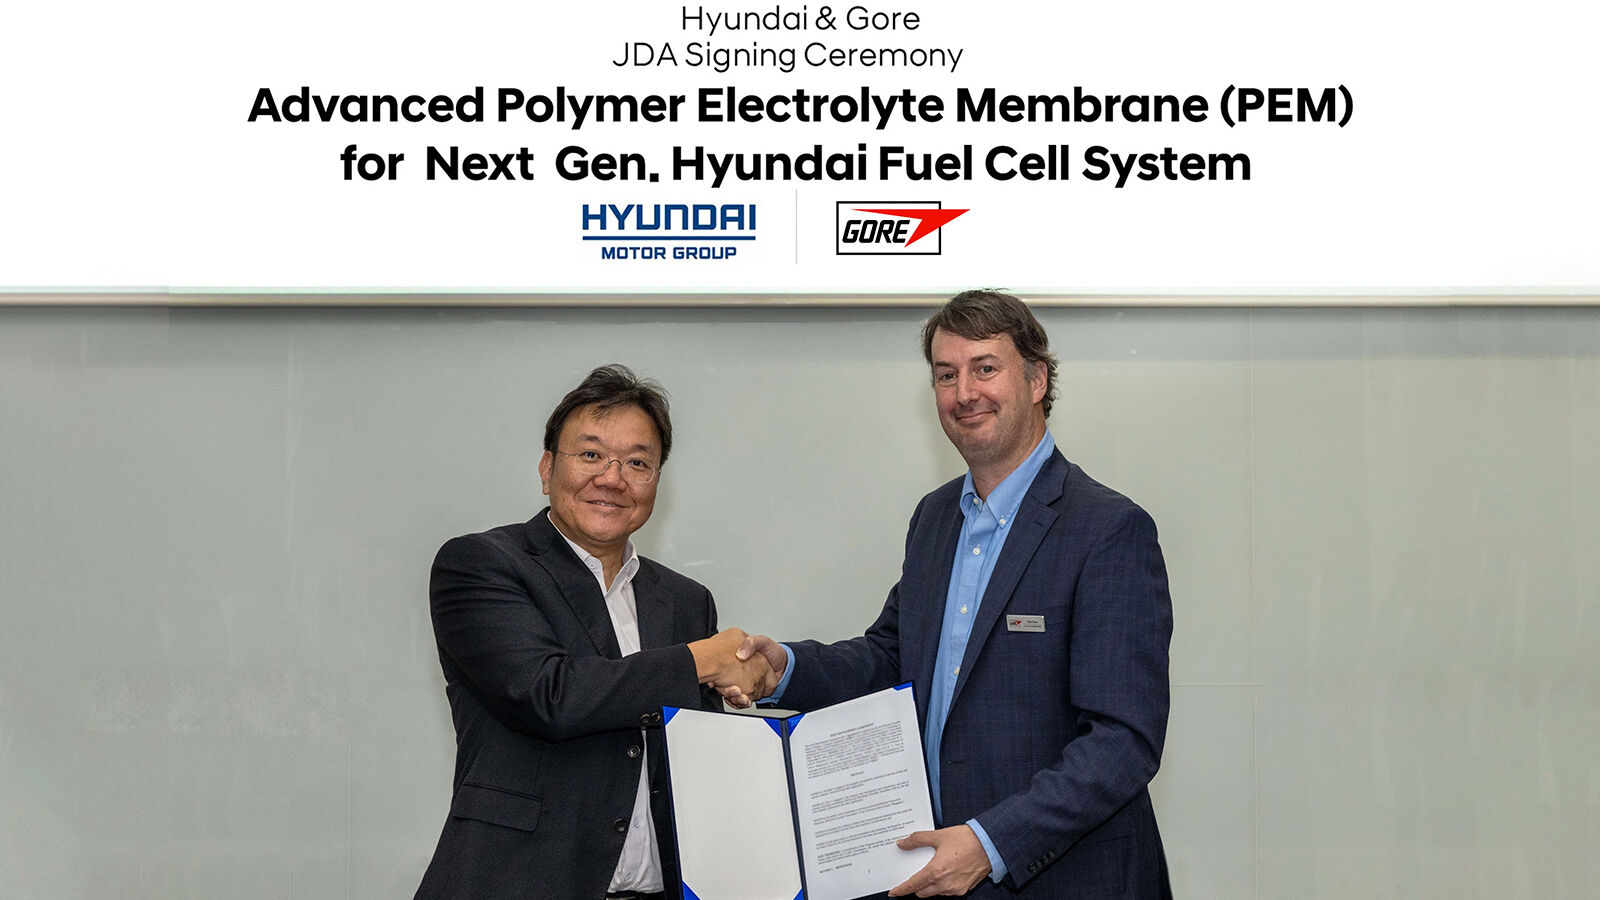 (Image) Hyundai Motor and Kia to Develop Polymer Electrolyte Membrane with Gore for Hydrogen Fuel Cell Systems